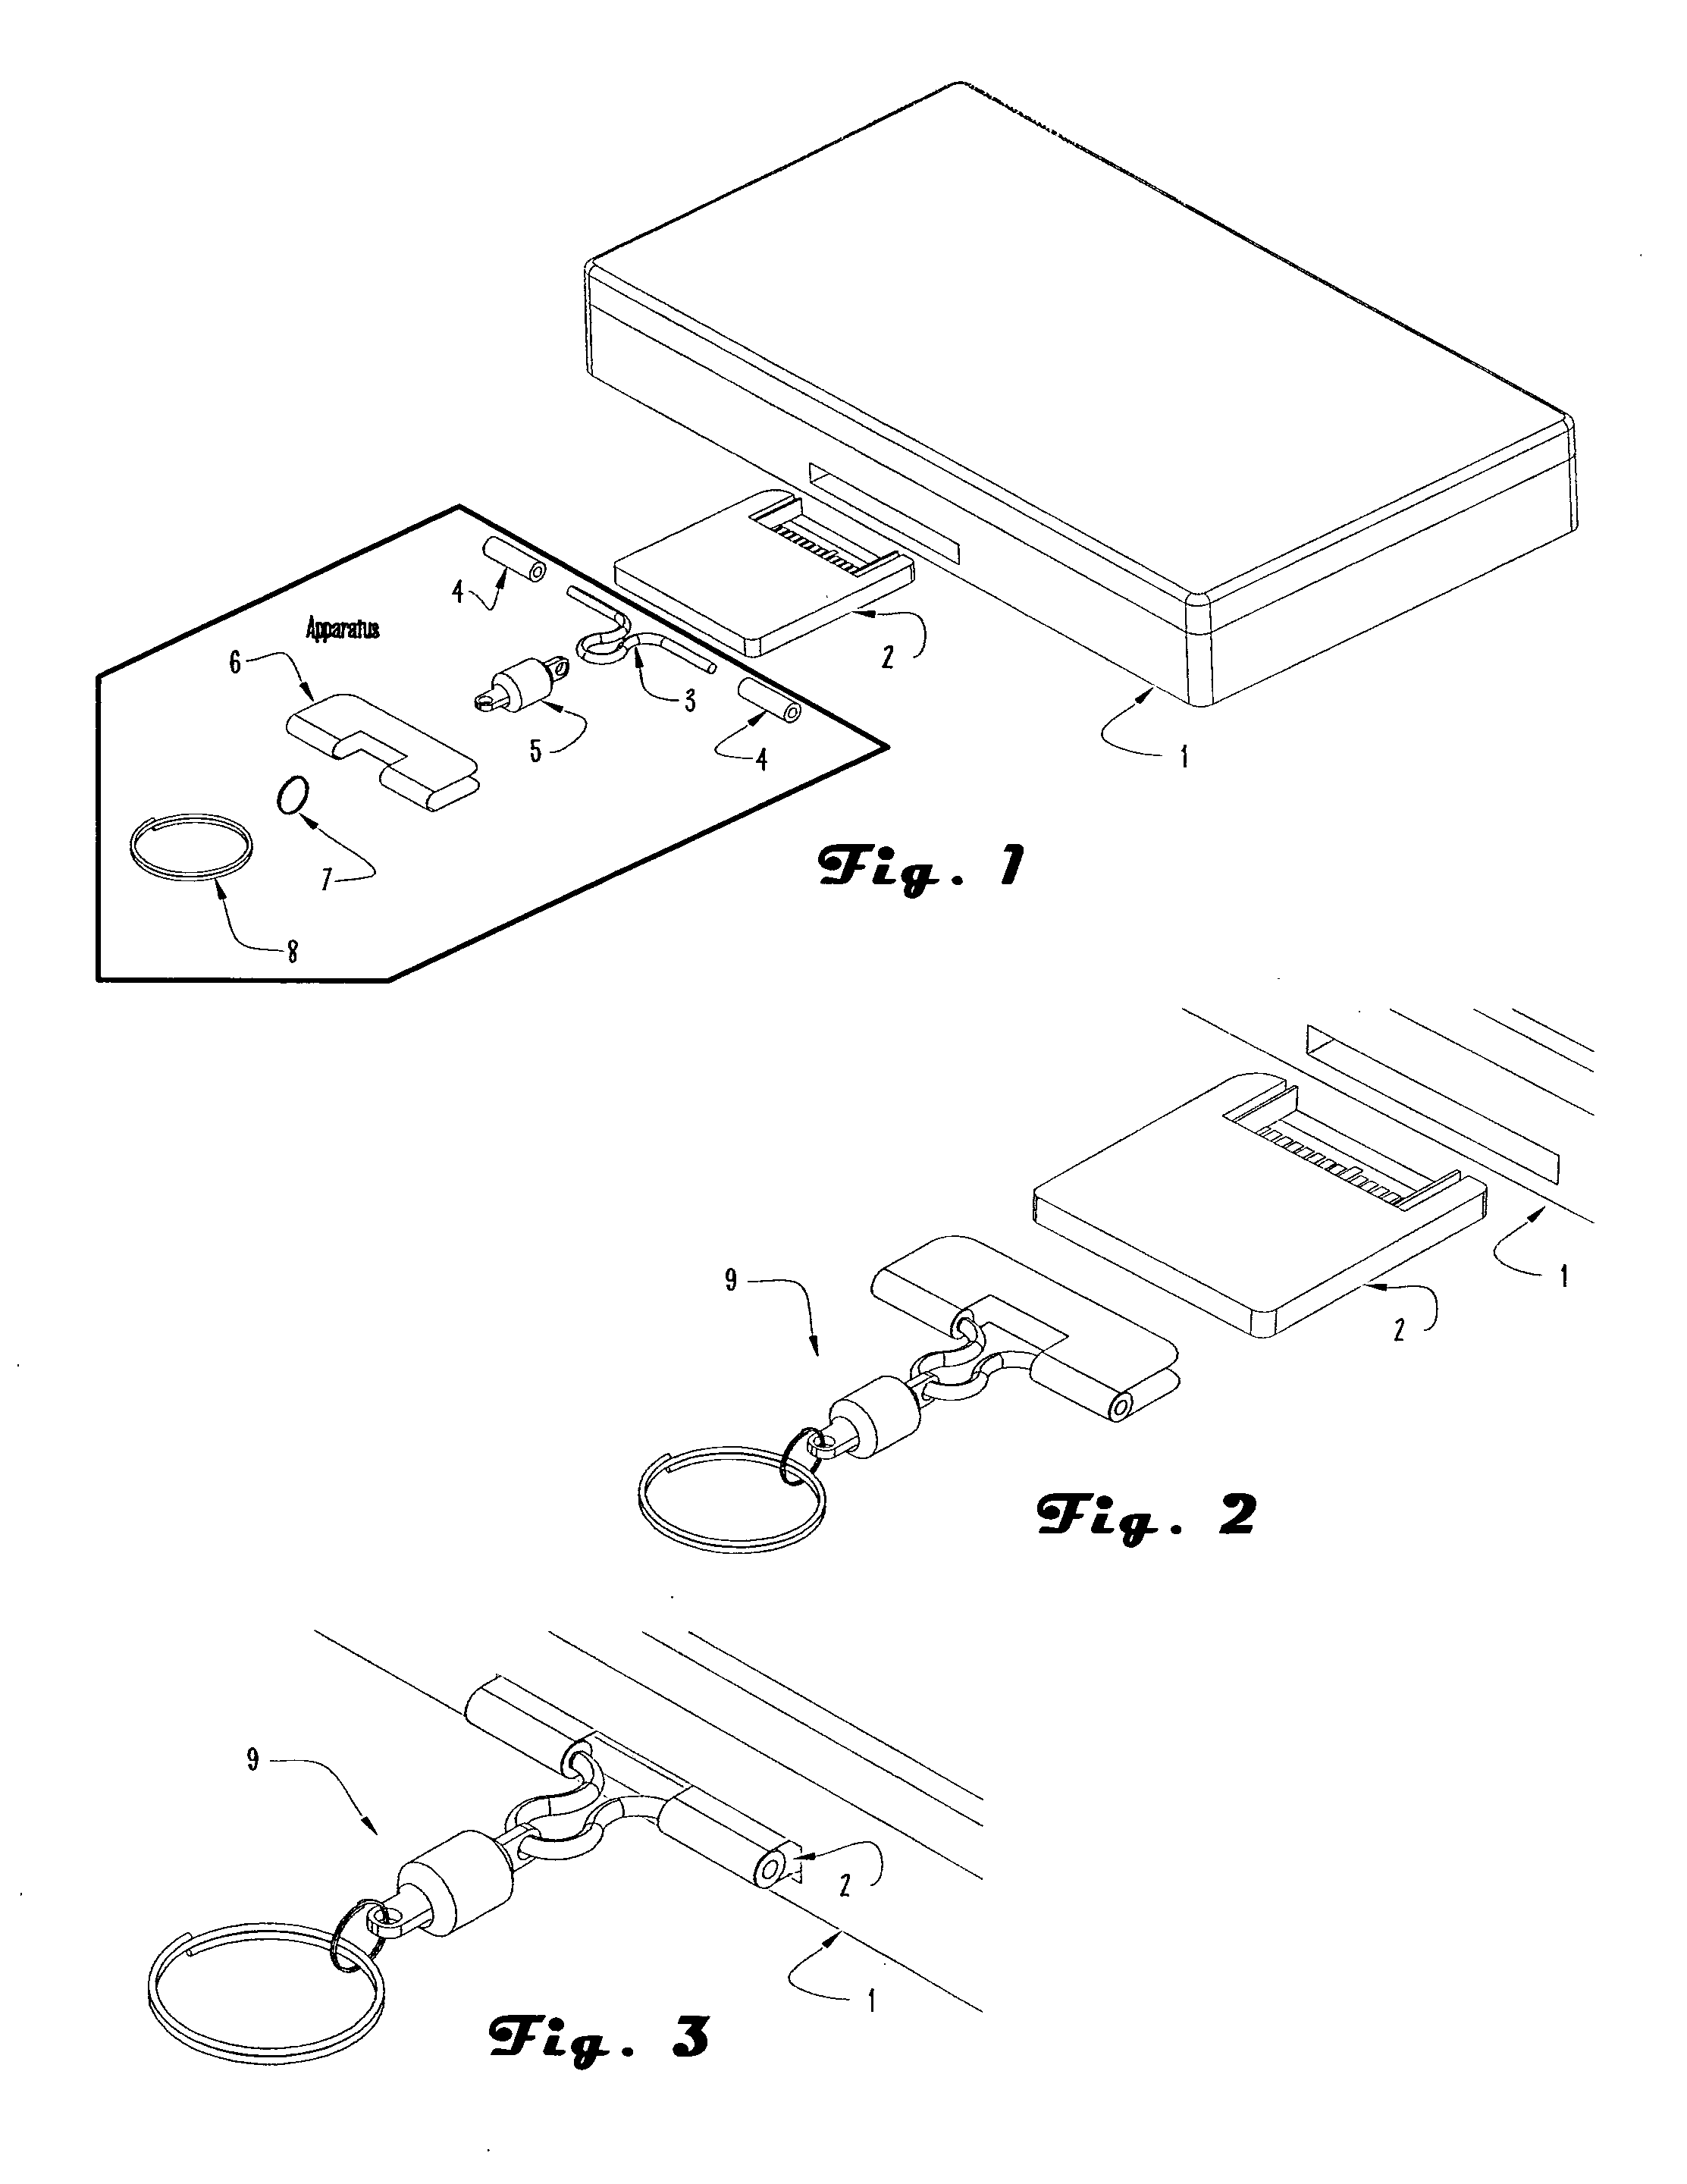 Apparatus for an attachment and carrying mechanism for electronic memory, data, or game cards or cartridges